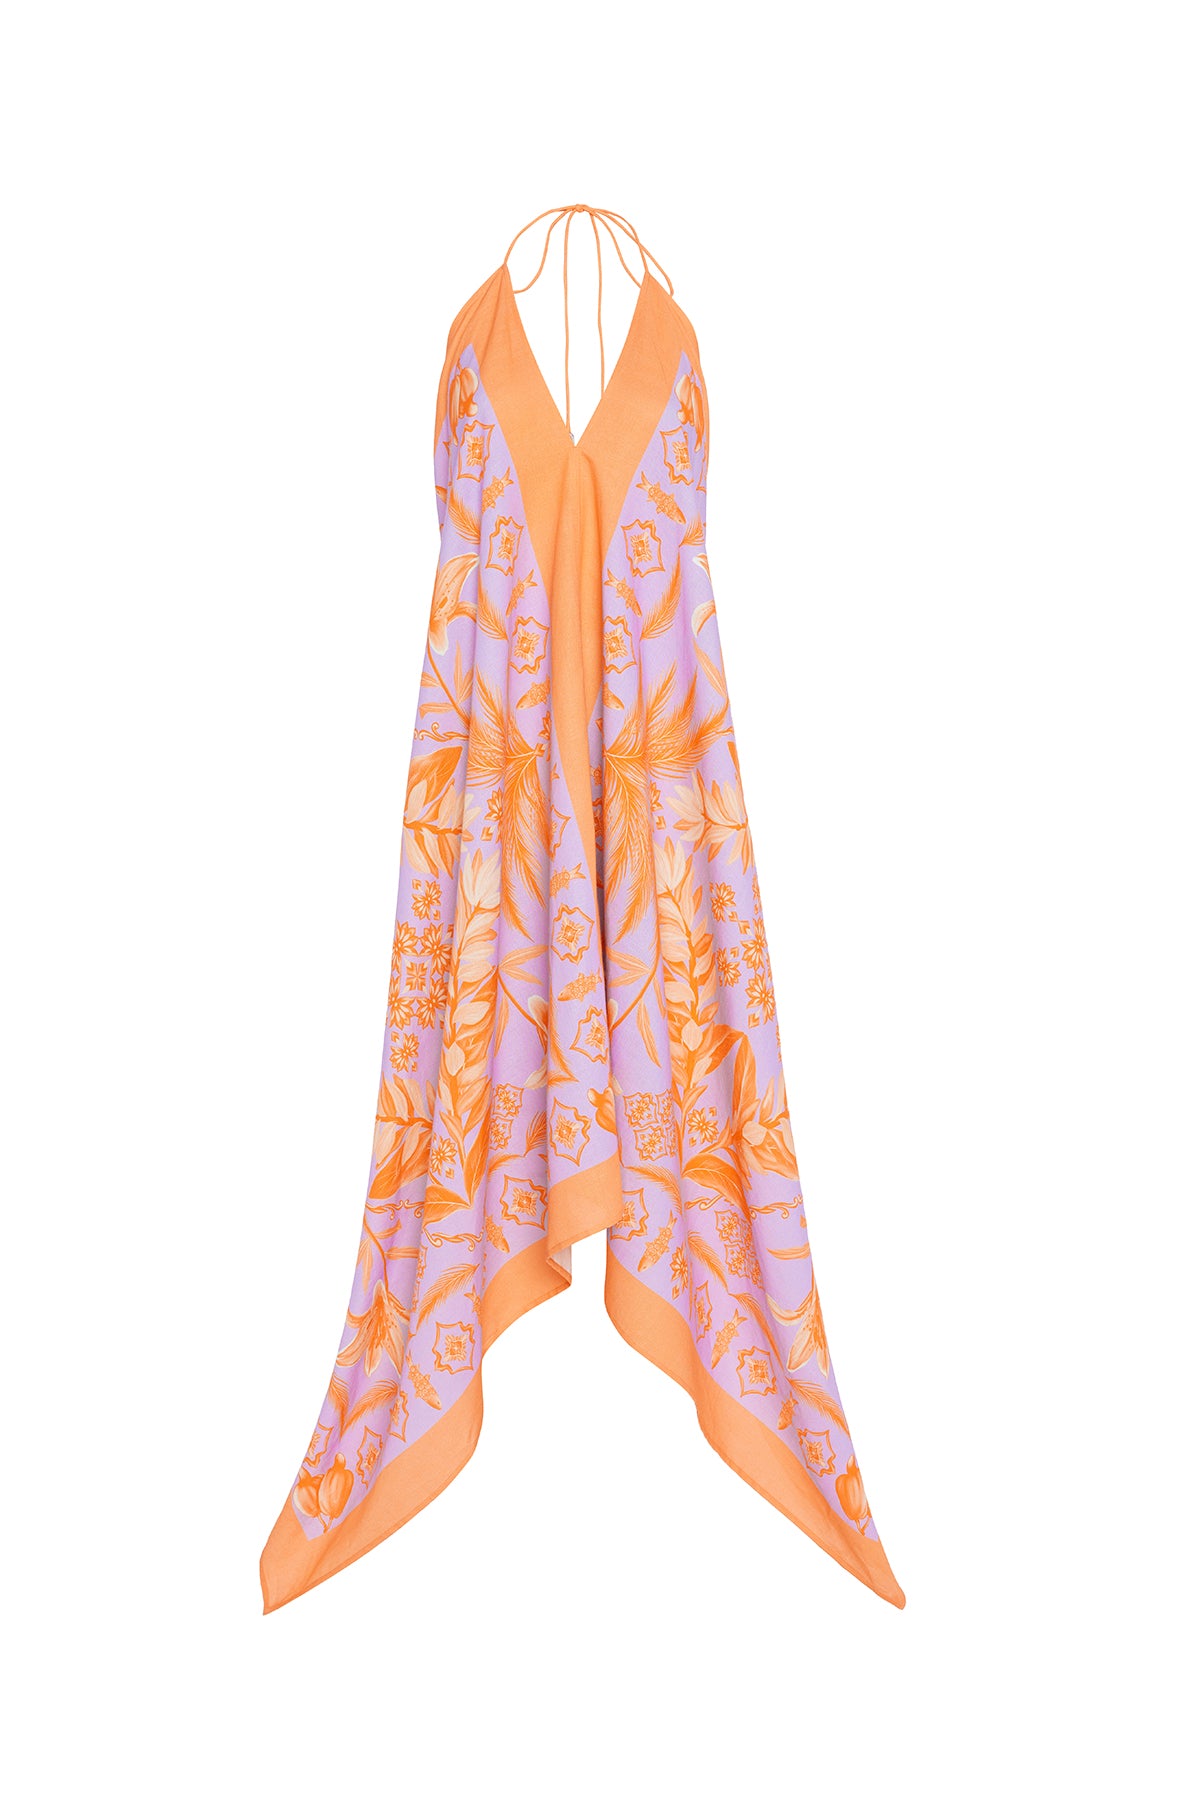 lilac and rust printed dress